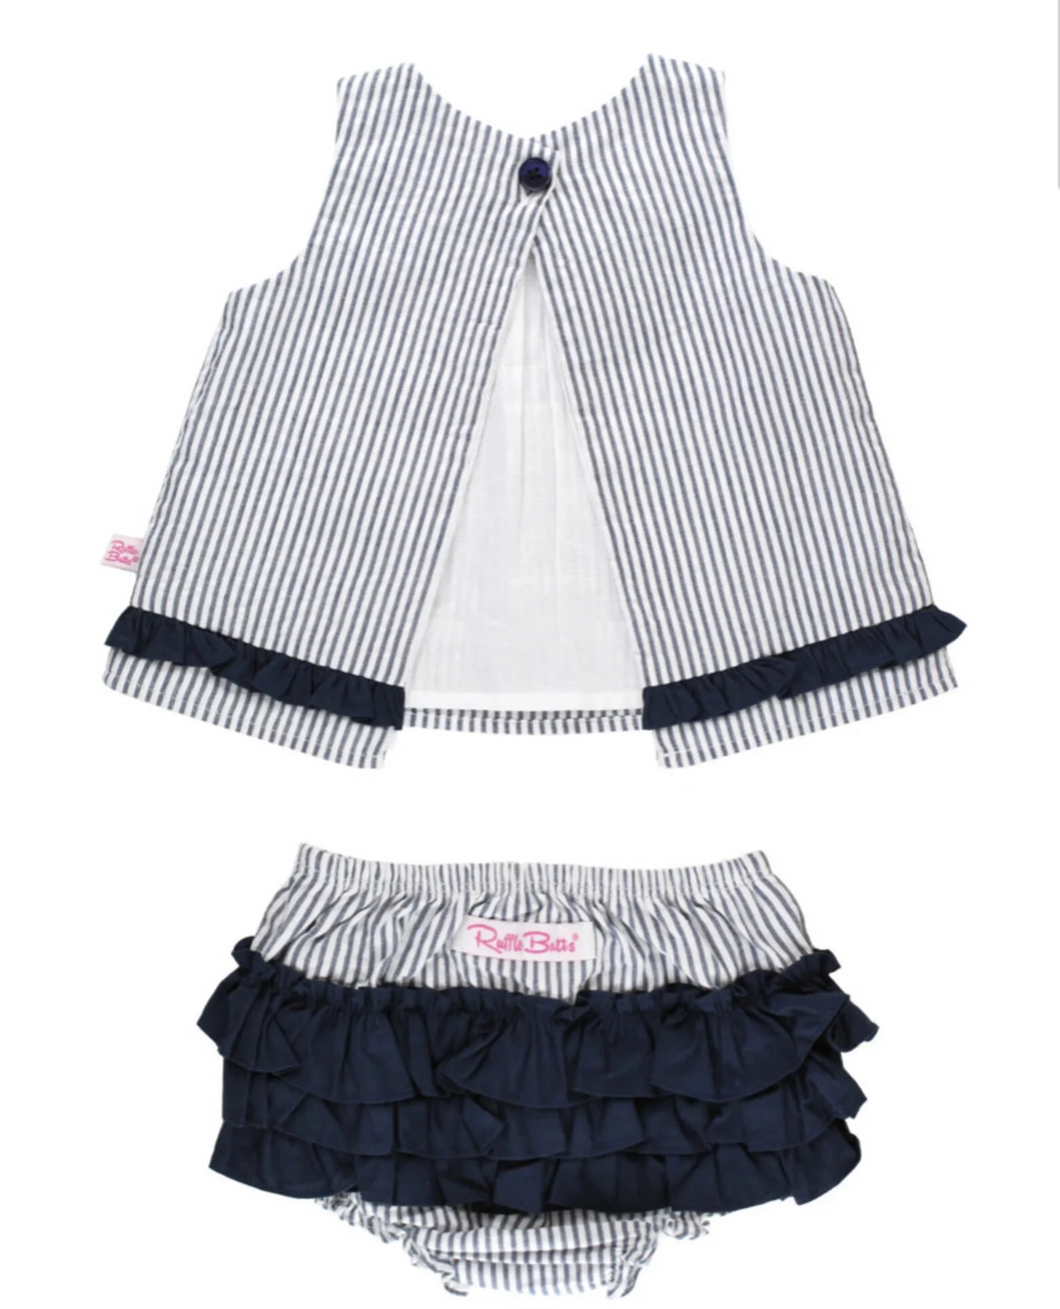 Woven Ruffle Swing Top and Bloomer Set